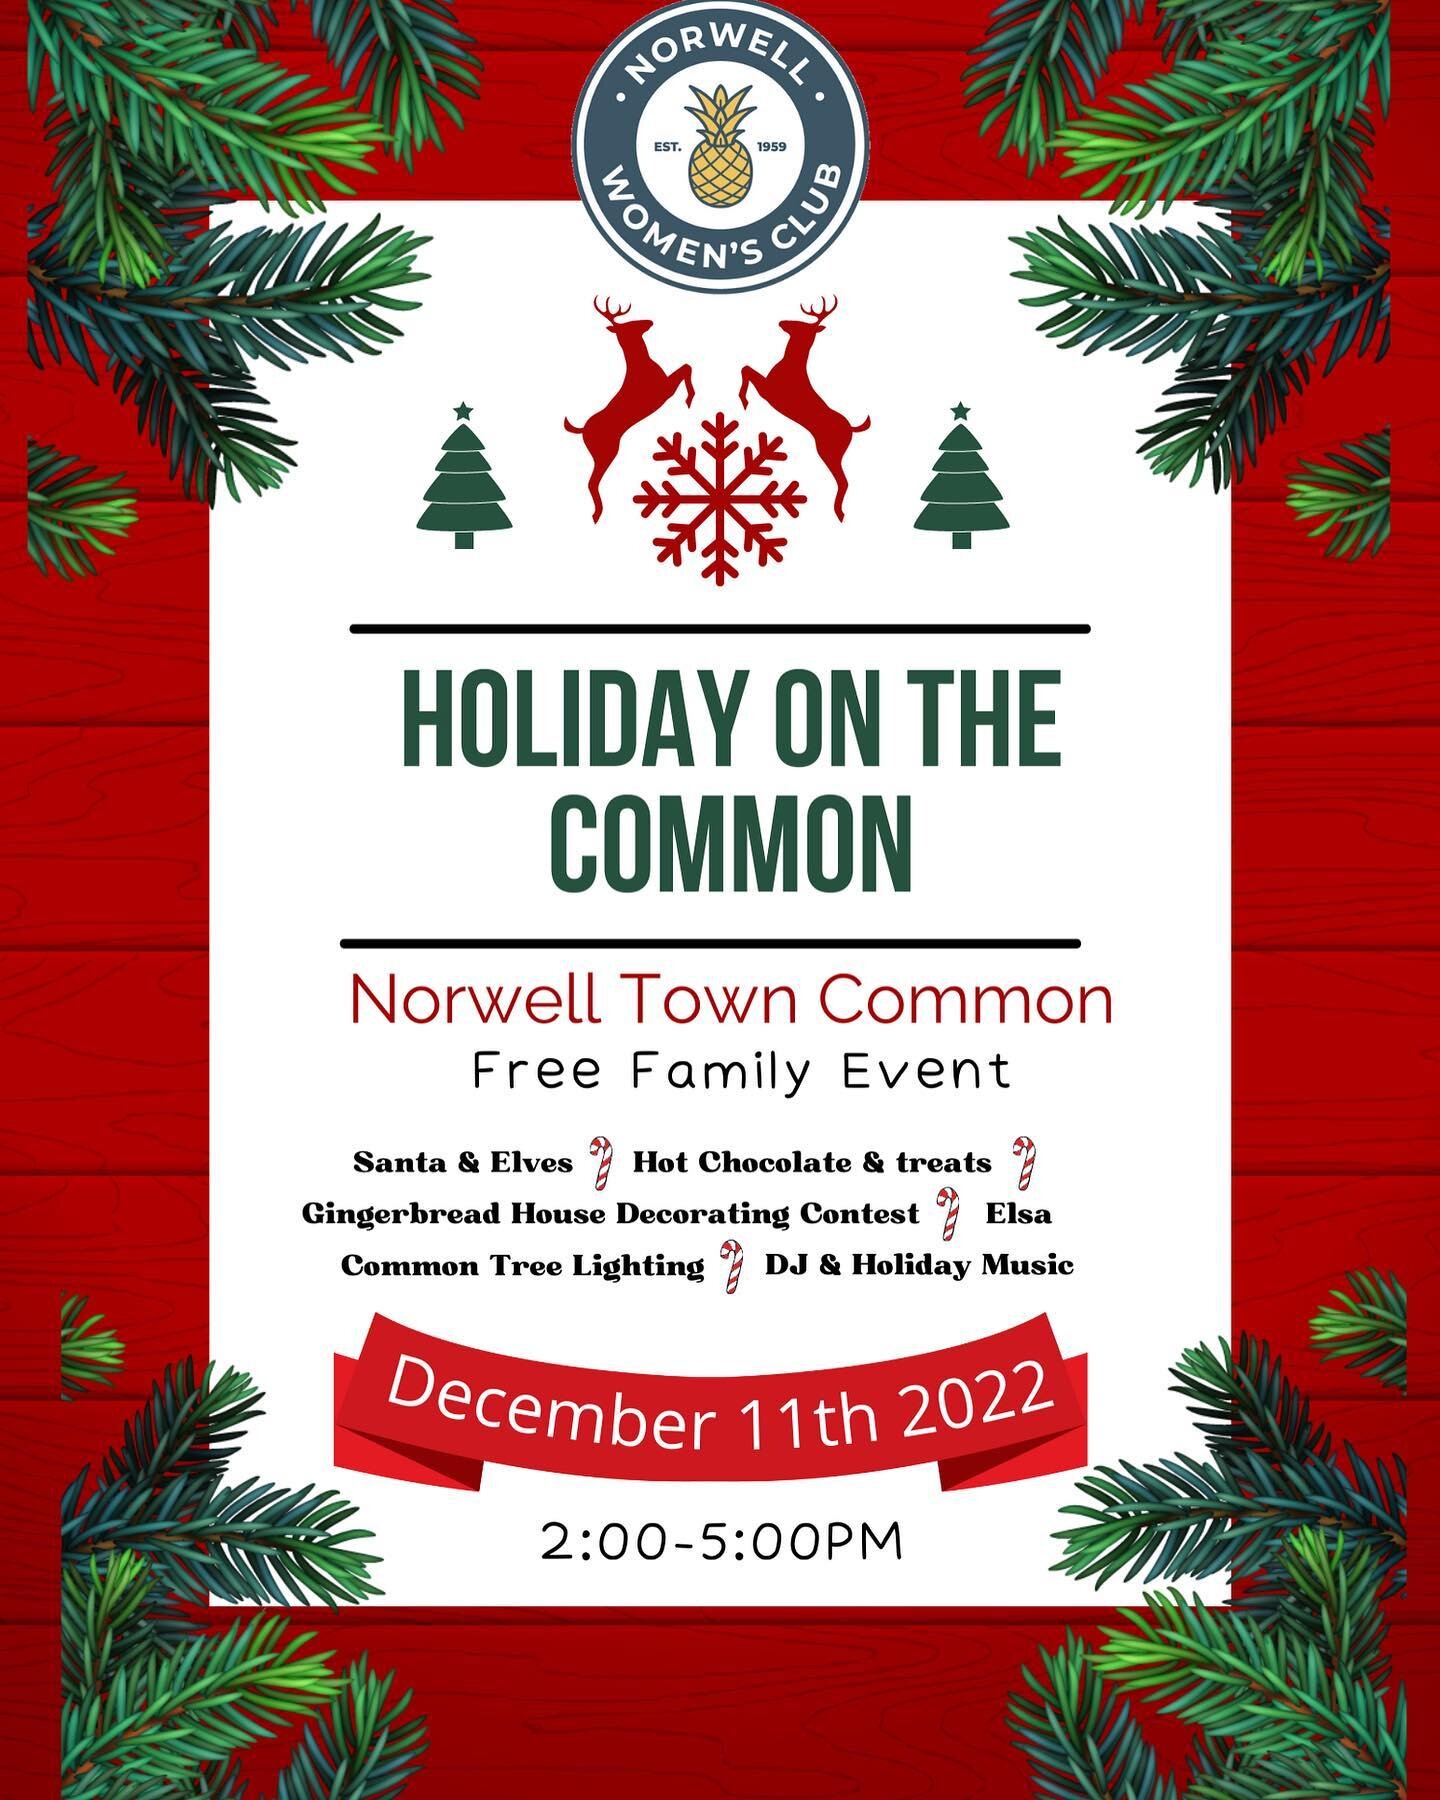 Mark your calendar 🗓️ Holiday on the Common is Sunday, December 11 from 2-5pm. So many fun activities- Gingerbread house decorating contest, music, so much fun!!! ❄️ Check out NWC website for all of the info, link in bio!!